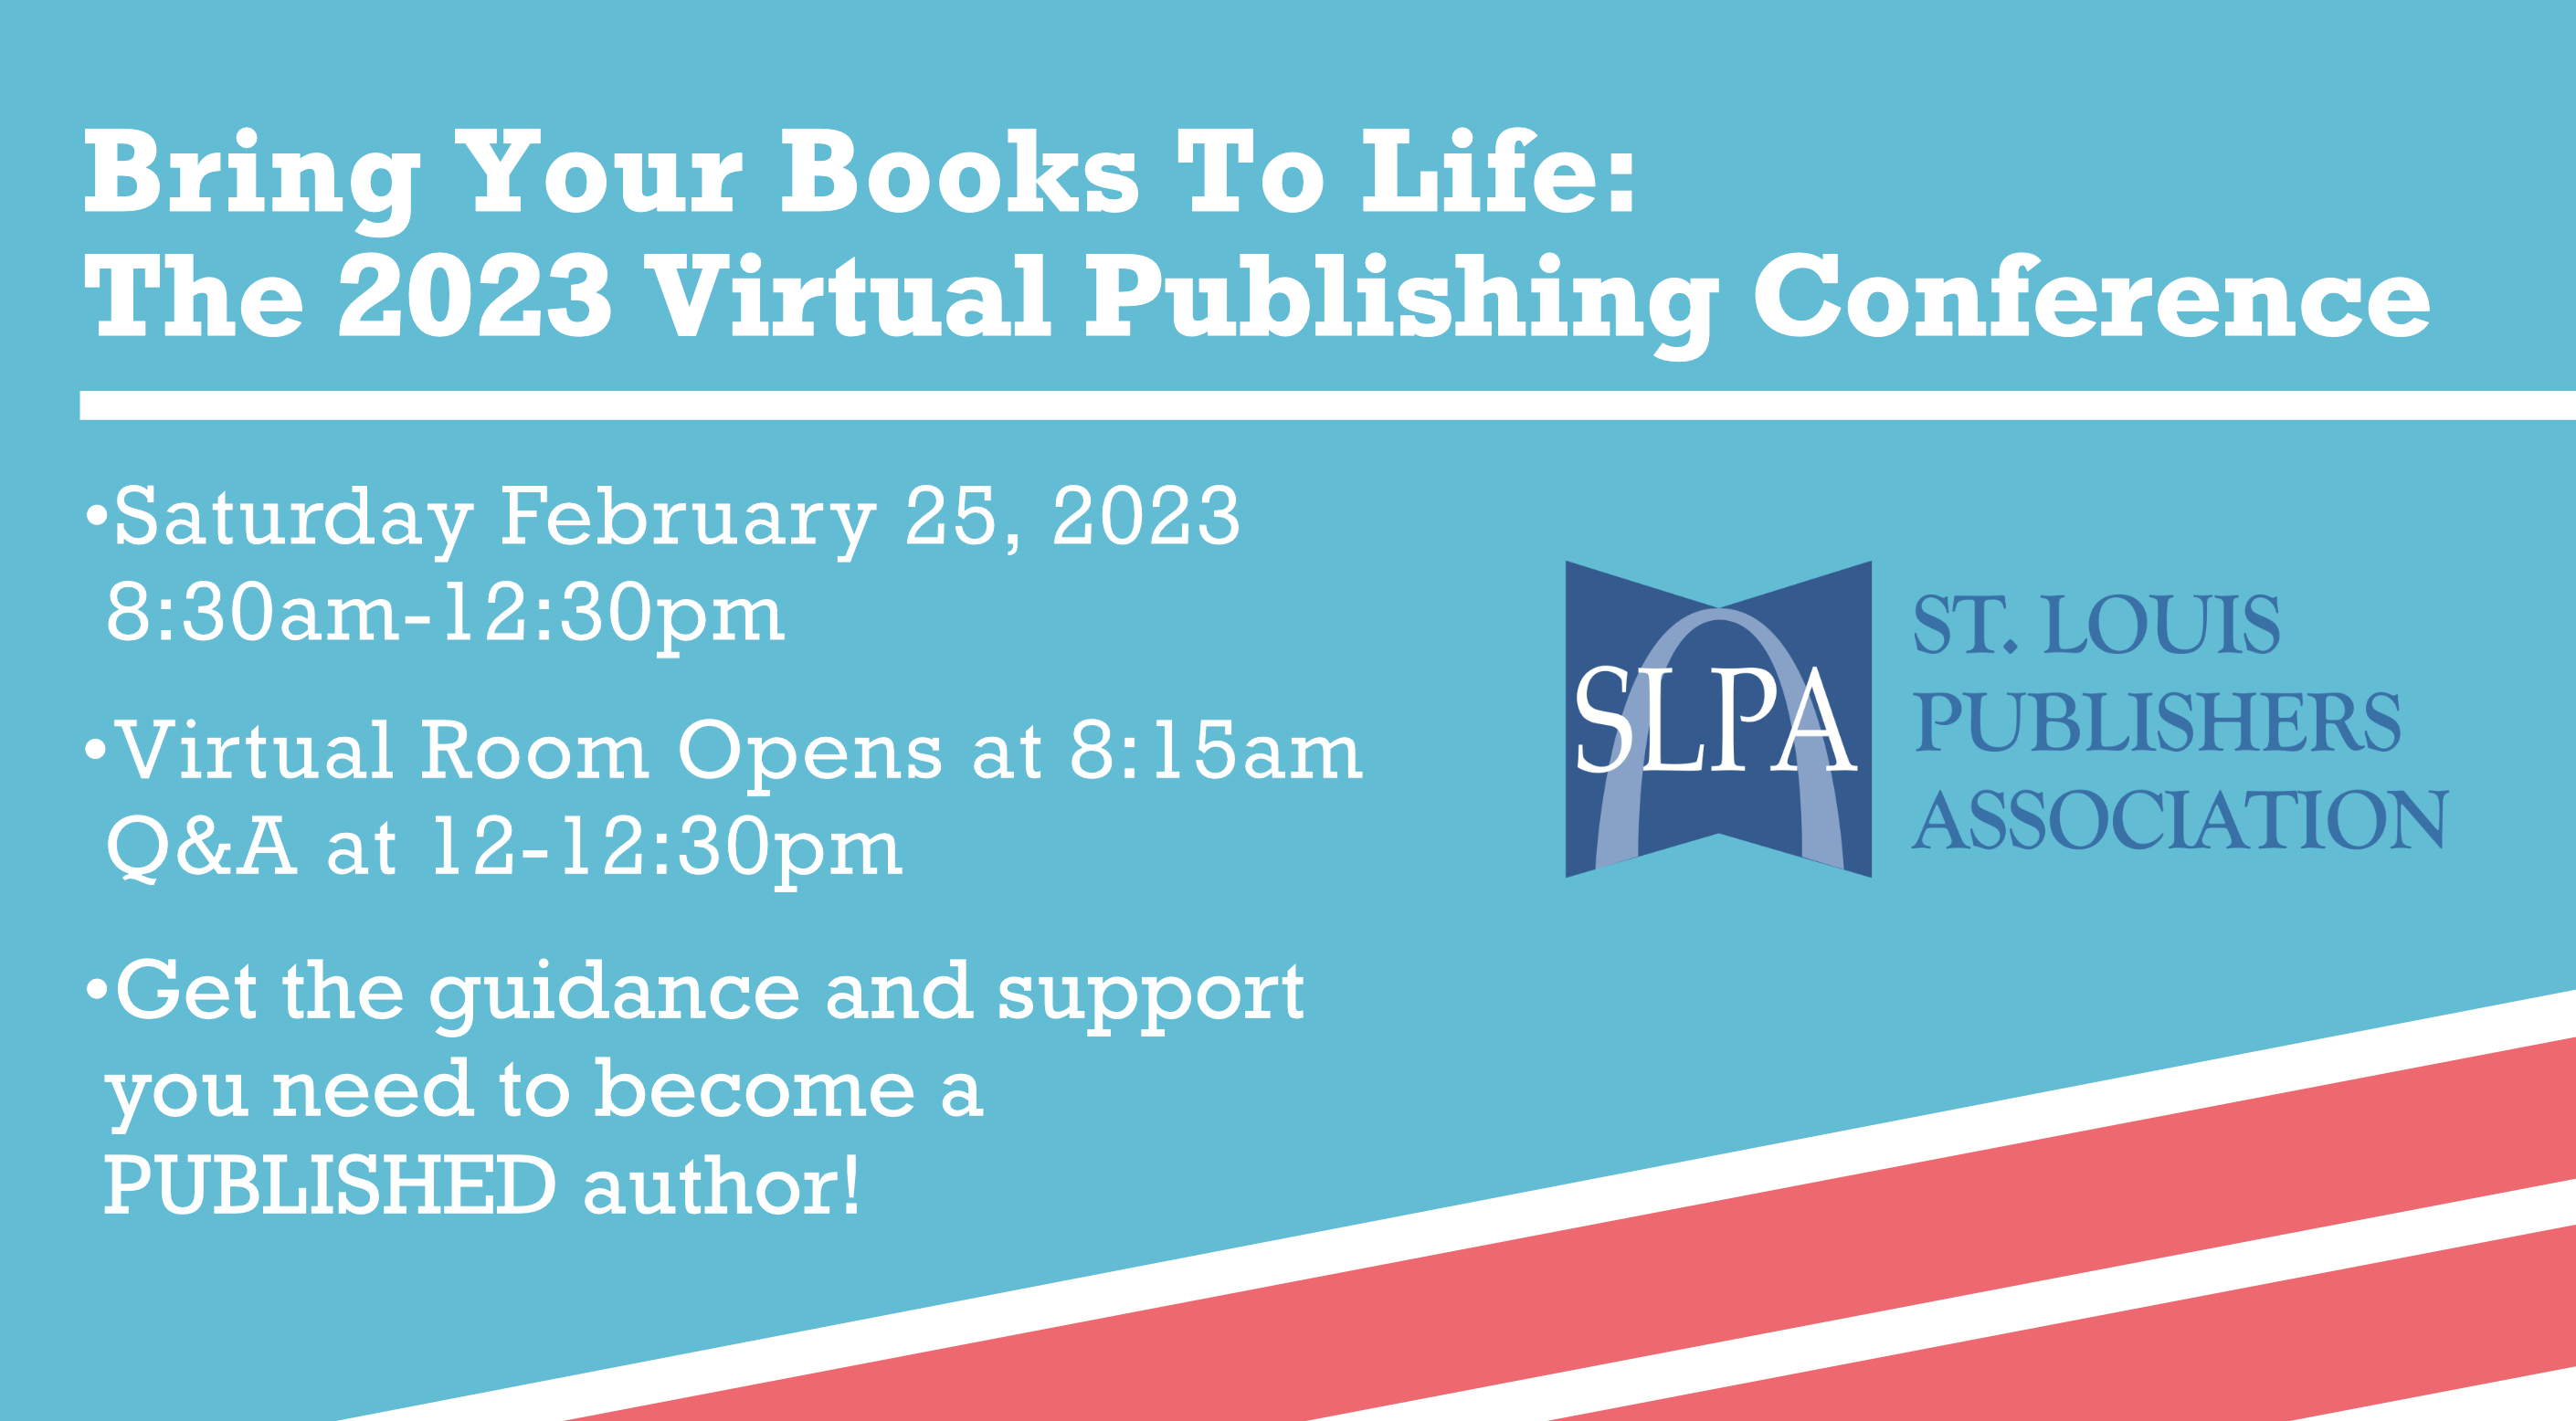 Bring Your Books To Life: The 2023 Virtual Publishing Conference Saturday, February 25th, 2023, 8:30 am - 12:30 pm Virtual Room opens at 8:15am, Q&A at 12-12:30pm Get the Guidance and Support You Need to Become a Published Author!